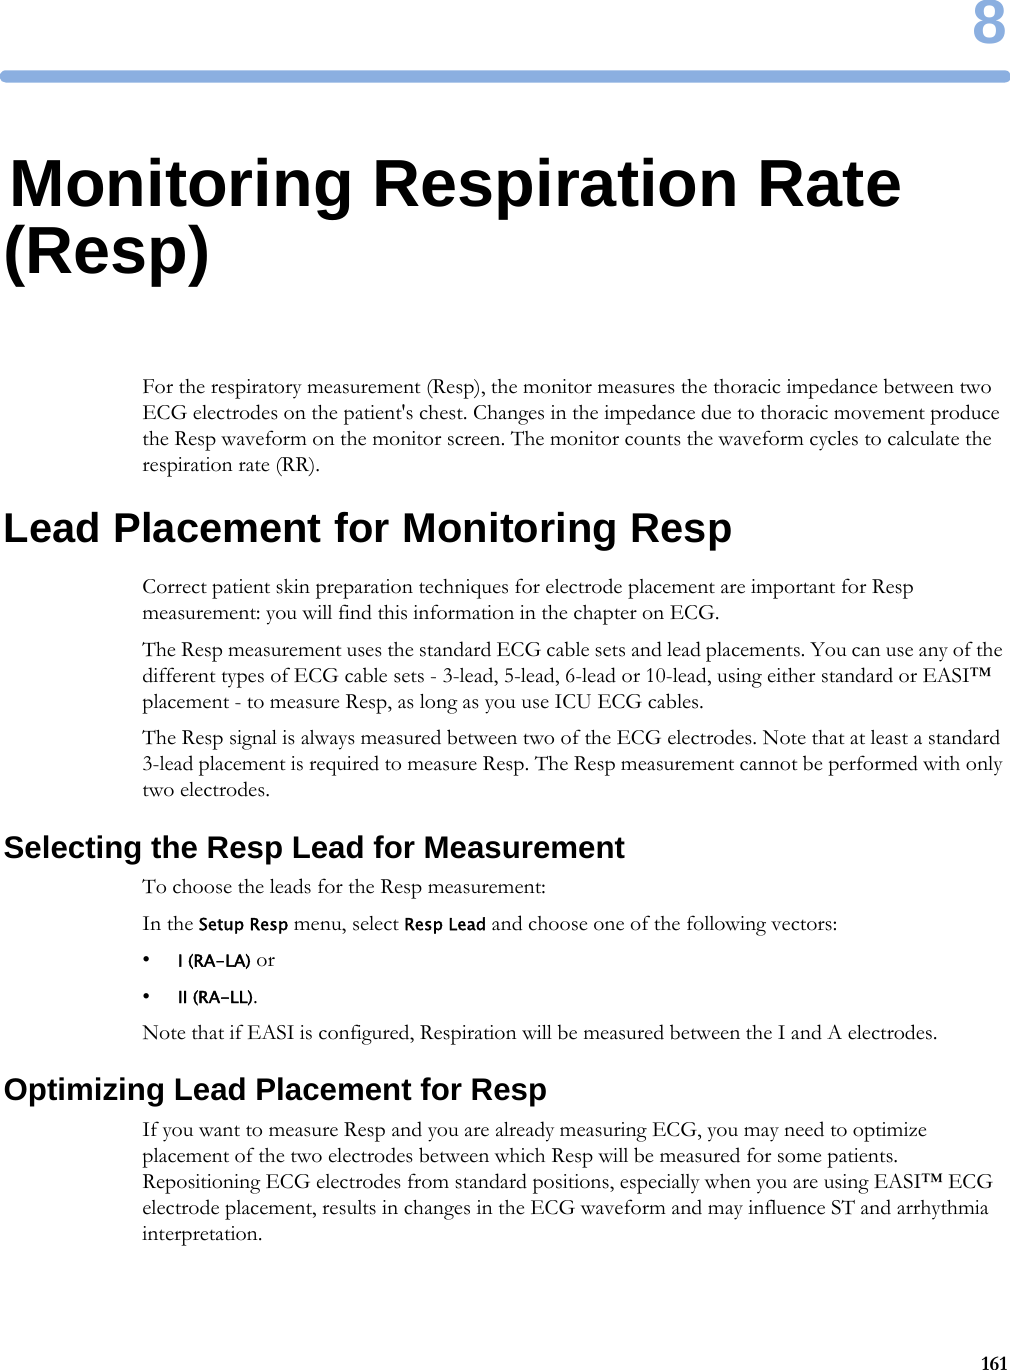 81618Monitoring Respiration Rate (Resp)For the respiratory measurement (Resp), the monitor measures the thoracic impedance between two ECG electrodes on the patient&apos;s chest. Changes in the impedance due to thoracic movement produce the Resp waveform on the monitor screen. The monitor counts the waveform cycles to calculate the respiration rate (RR).Lead Placement for Monitoring RespCorrect patient skin preparation techniques for electrode placement are important for Resp measurement: you will find this information in the chapter on ECG.The Resp measurement uses the standard ECG cable sets and lead placements. You can use any of the different types of ECG cable sets - 3-lead, 5-lead, 6-lead or 10-lead, using either standard or EASI™ placement - to measure Resp, as long as you use ICU ECG cables.The Resp signal is always measured between two of the ECG electrodes. Note that at least a standard 3-lead placement is required to measure Resp. The Resp measurement cannot be performed with only two electrodes.Selecting the Resp Lead for MeasurementTo choose the leads for the Resp measurement:In the Setup Resp menu, select Resp Lead and choose one of the following vectors:•I (RA-LA) or•II (RA-LL).Note that if EASI is configured, Respiration will be measured between the I and A electrodes.Optimizing Lead Placement for RespIf you want to measure Resp and you are already measuring ECG, you may need to optimize placement of the two electrodes between which Resp will be measured for some patients. Repositioning ECG electrodes from standard positions, especially when you are using EASI™ ECG electrode placement, results in changes in the ECG waveform and may influence ST and arrhythmia interpretation.